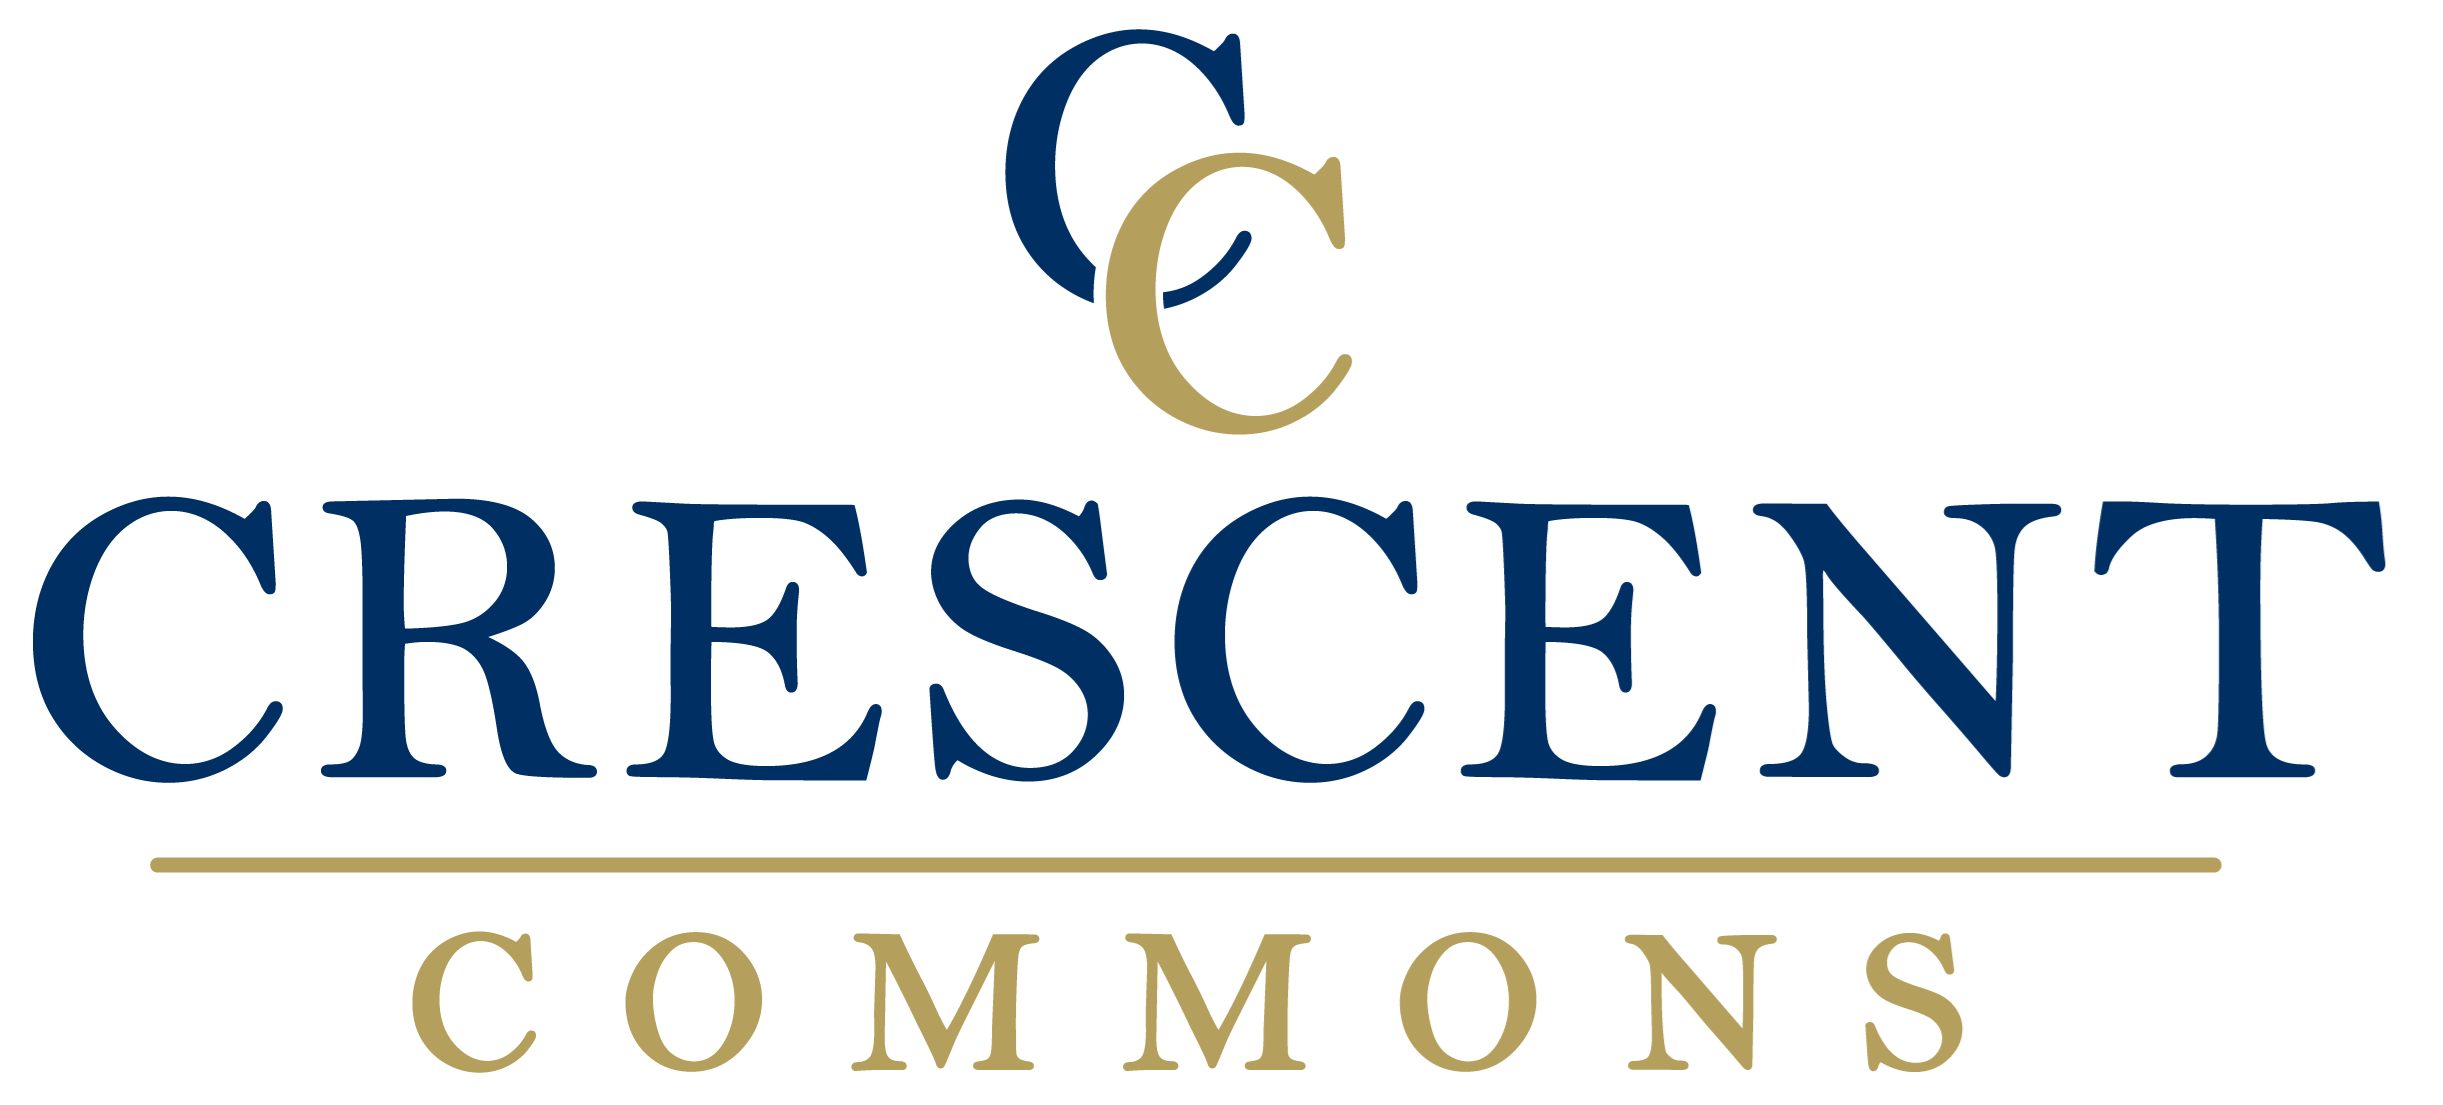 Fayetteville Logo - Crescent Commons | Apartments in Fayetteville, NC